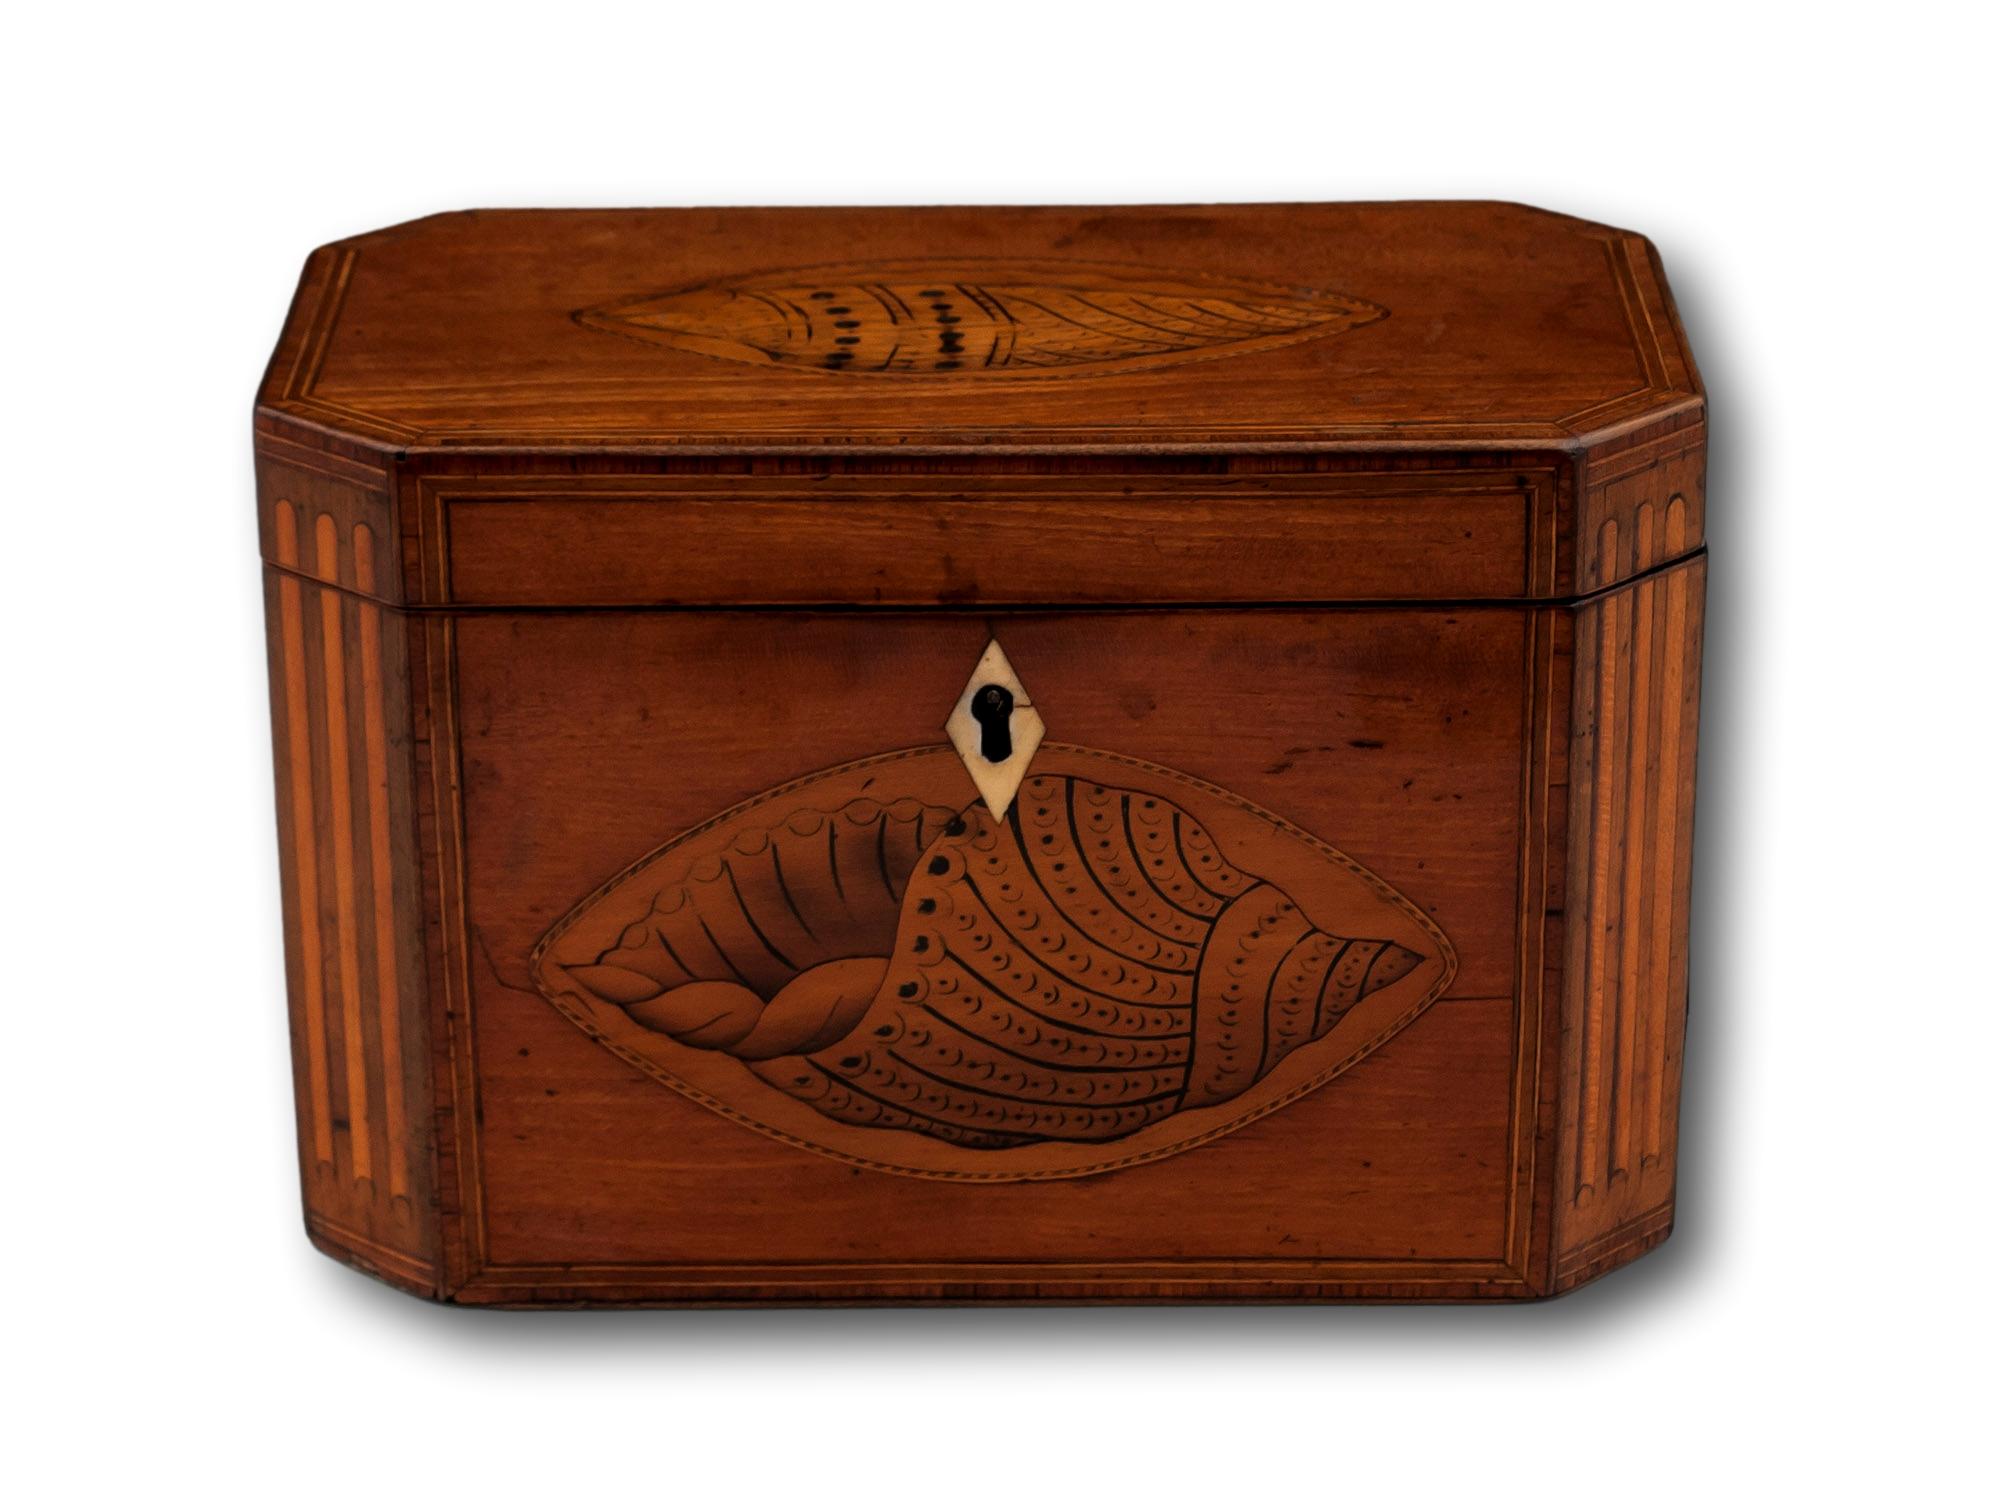 With Conch Shell Inlay

From our Tea Caddy Collection, we are pleased to offer this superb Georgian Satinwood Tea Caddy. The Tea Caddy of rectangular shape with canted corners having inlaid boxwood flutes. The lid and front panel feature Tulipwood